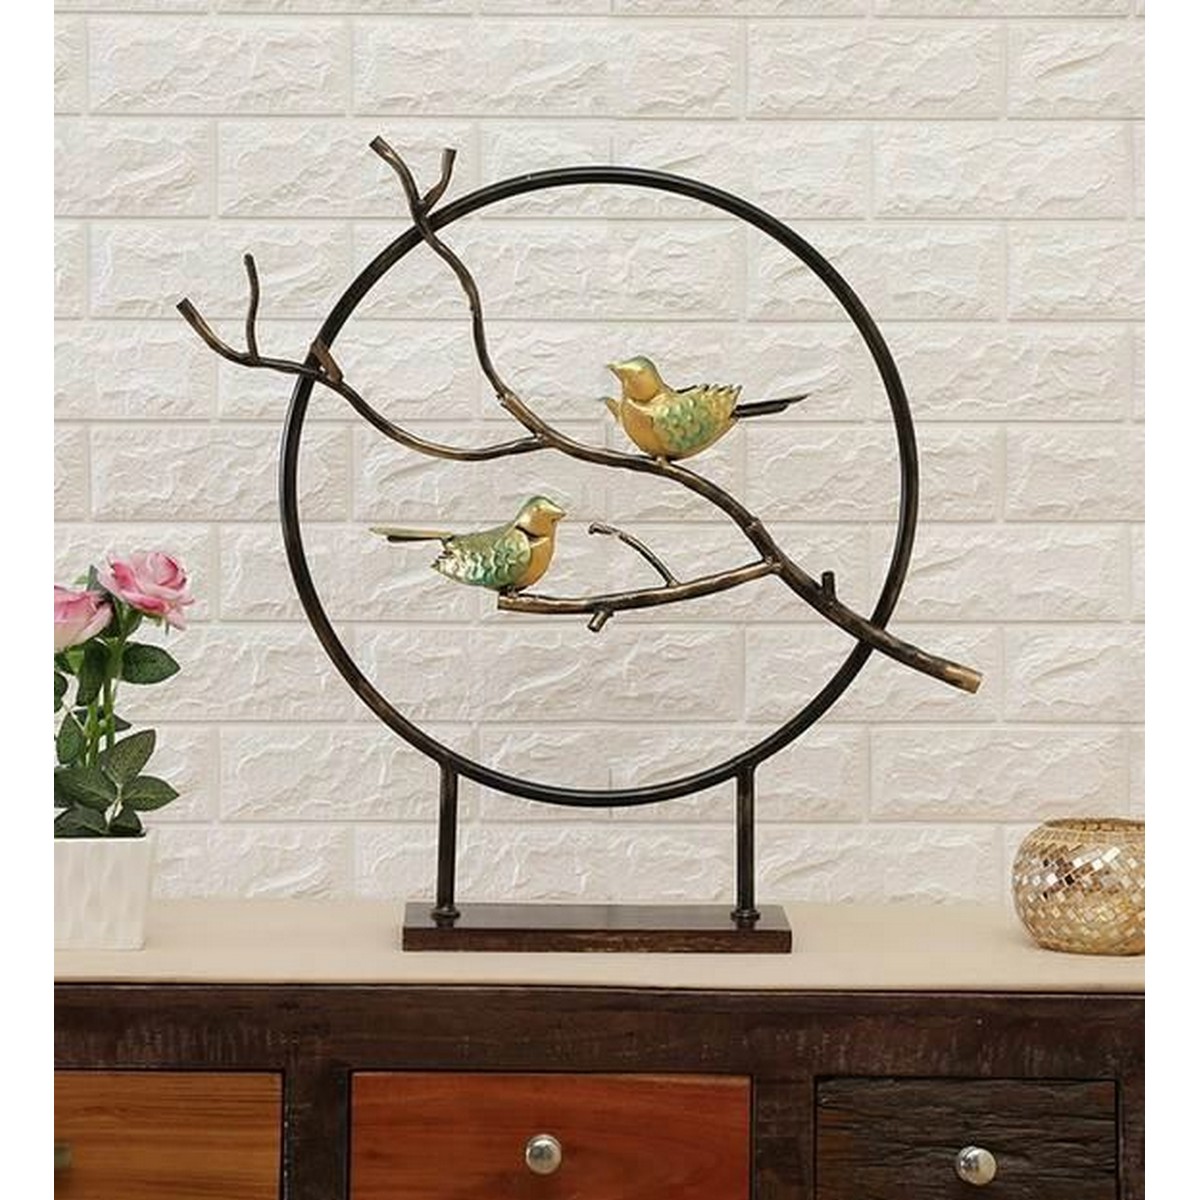 Iron Made Decorative of Birds in a Circular Pattern  